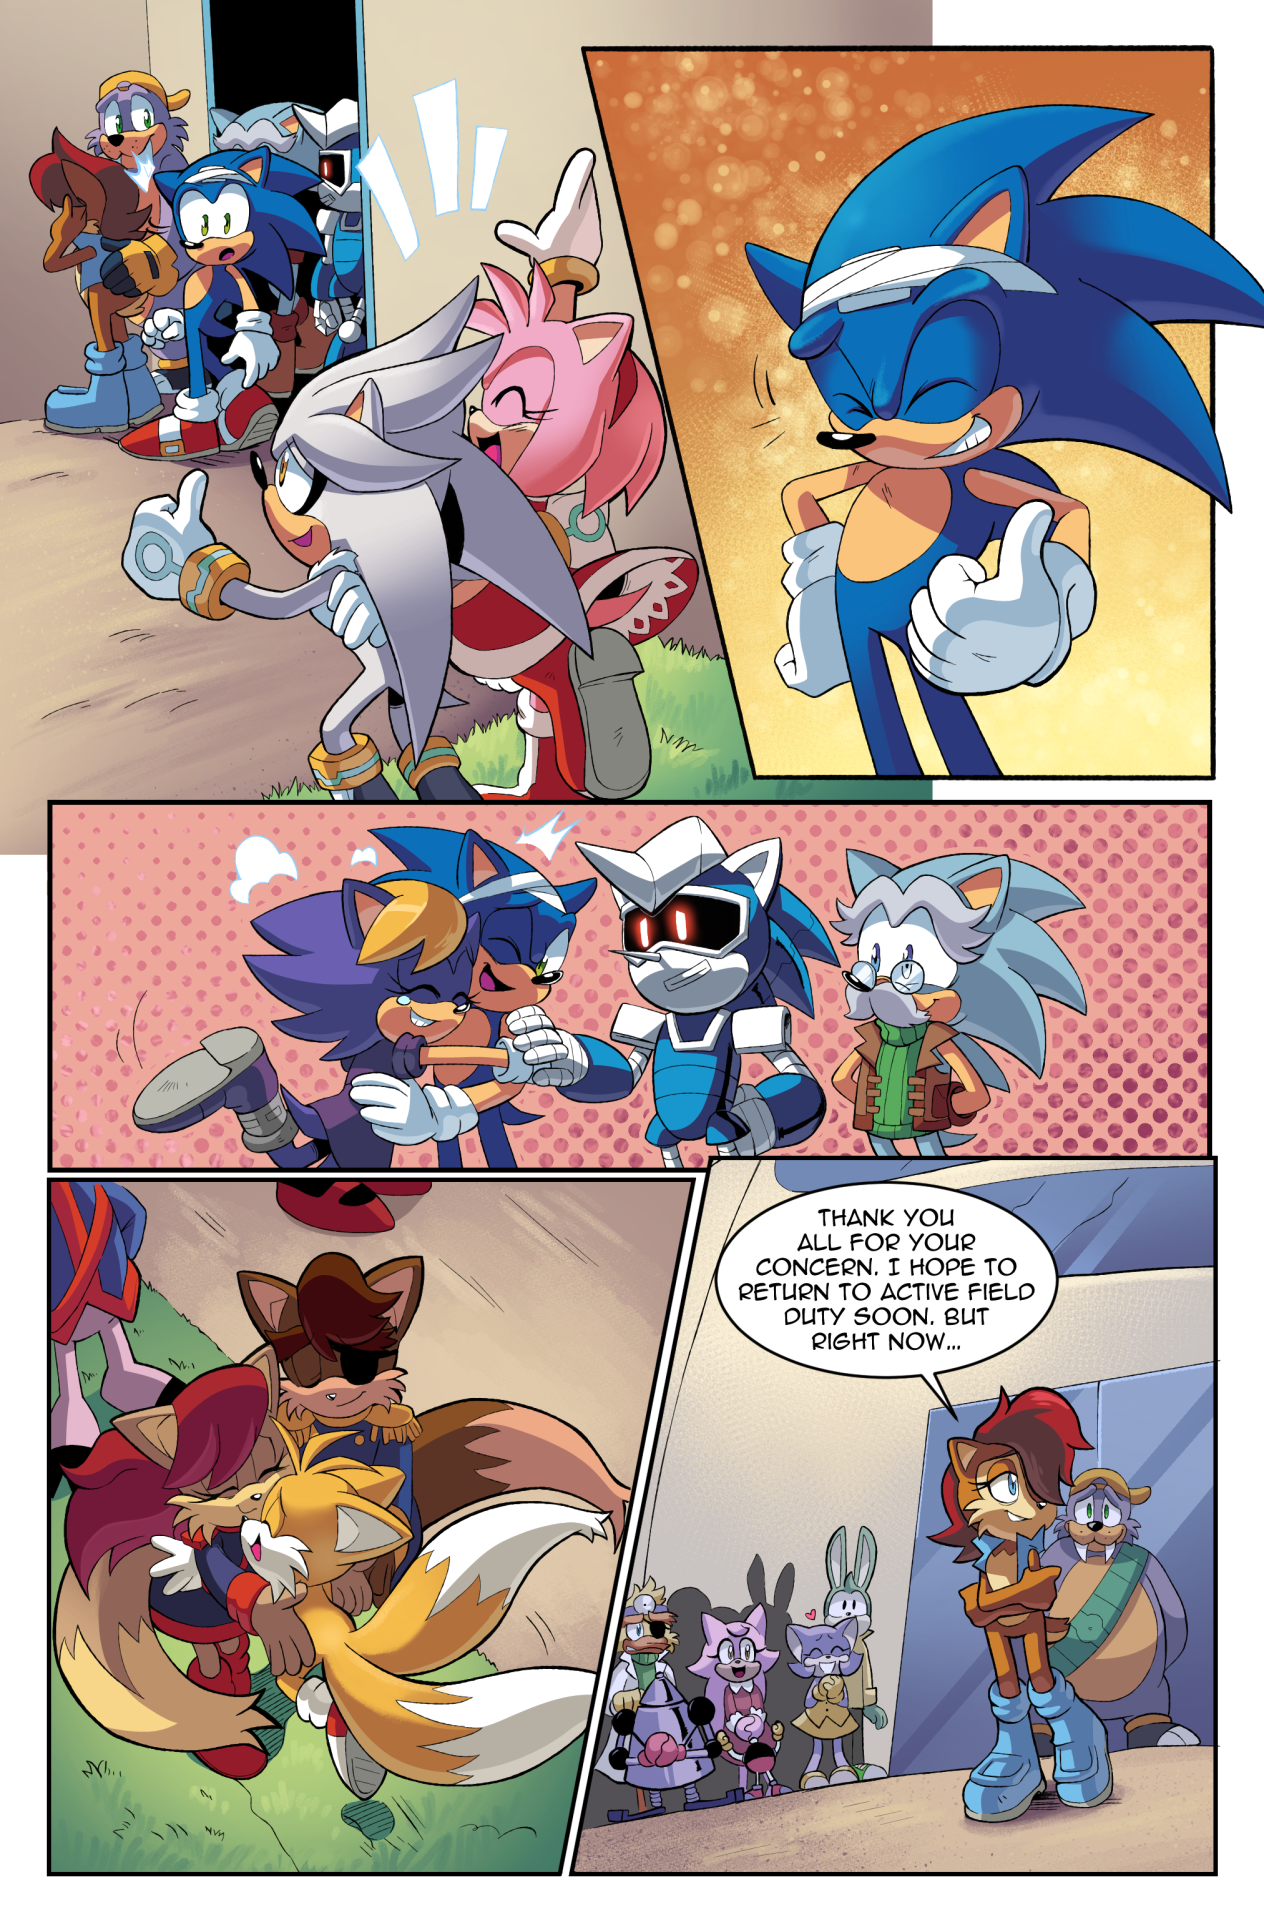 Archie Sonic Online — Sonic the Hedgehog Online #250 Behind the Scenes!